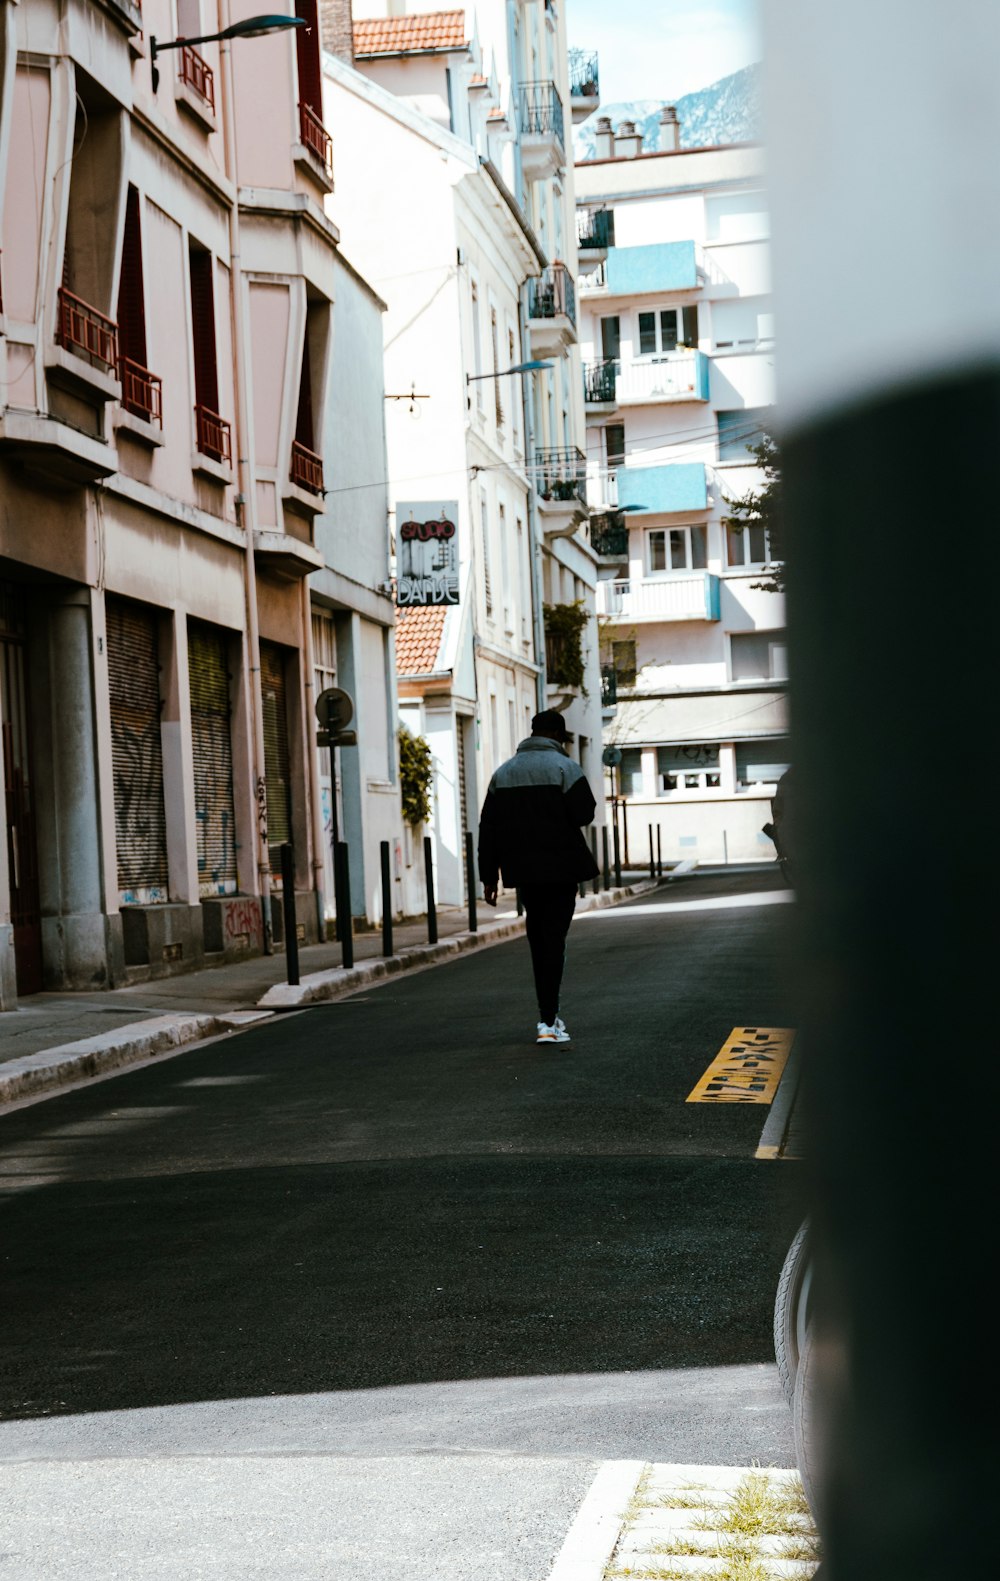 a person walking down a street with buildings in the background